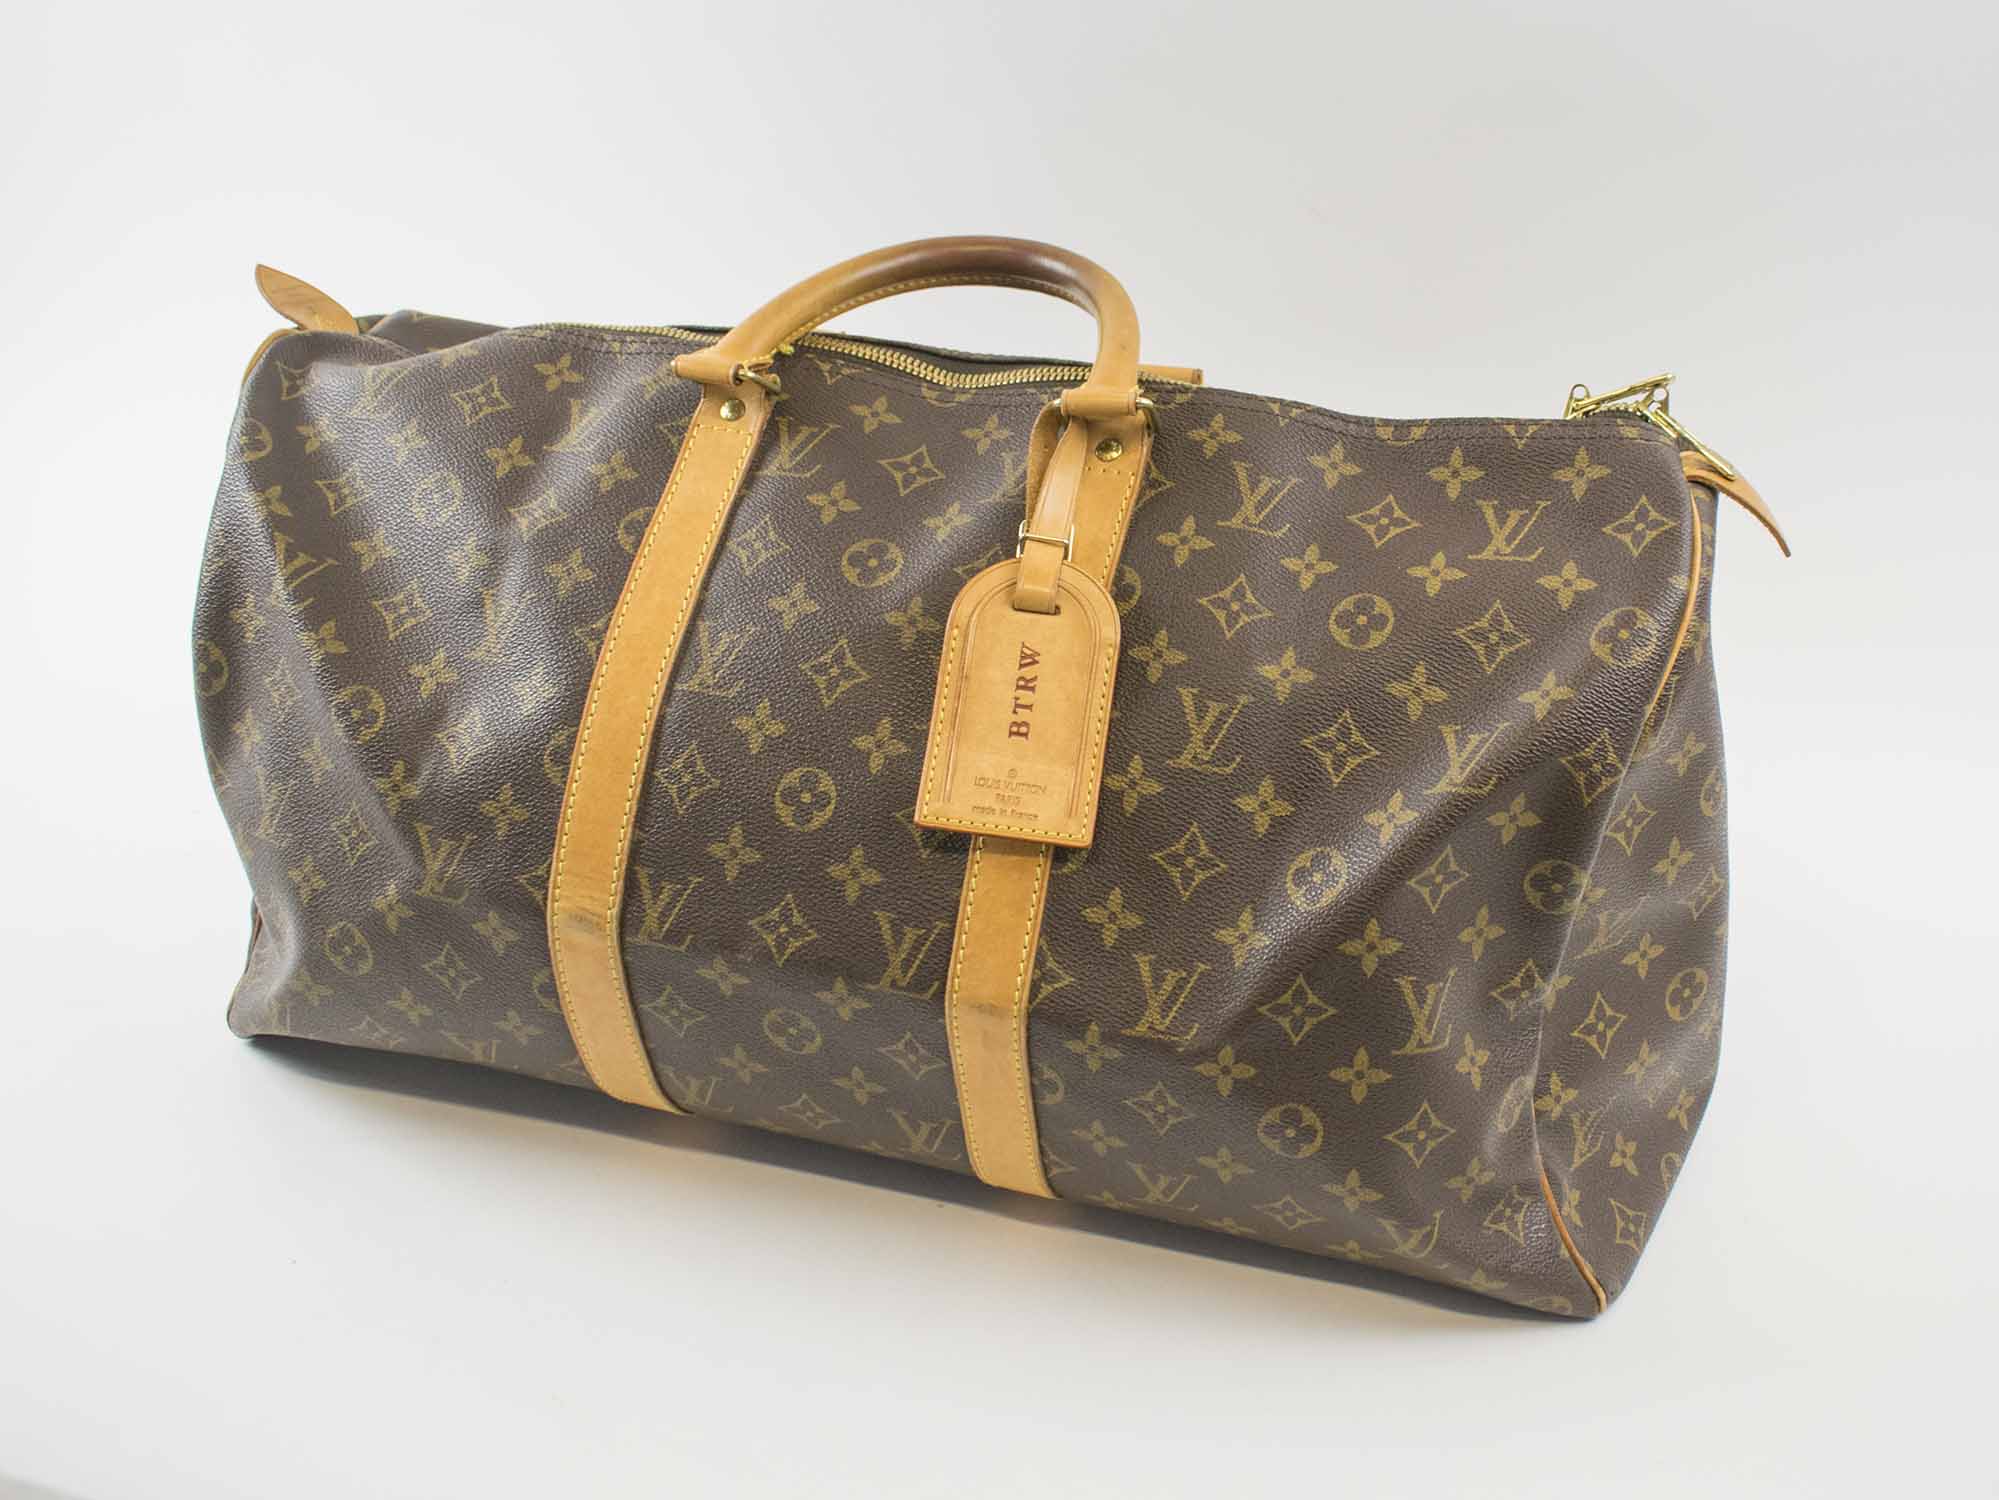 louis vuitton bag with initials